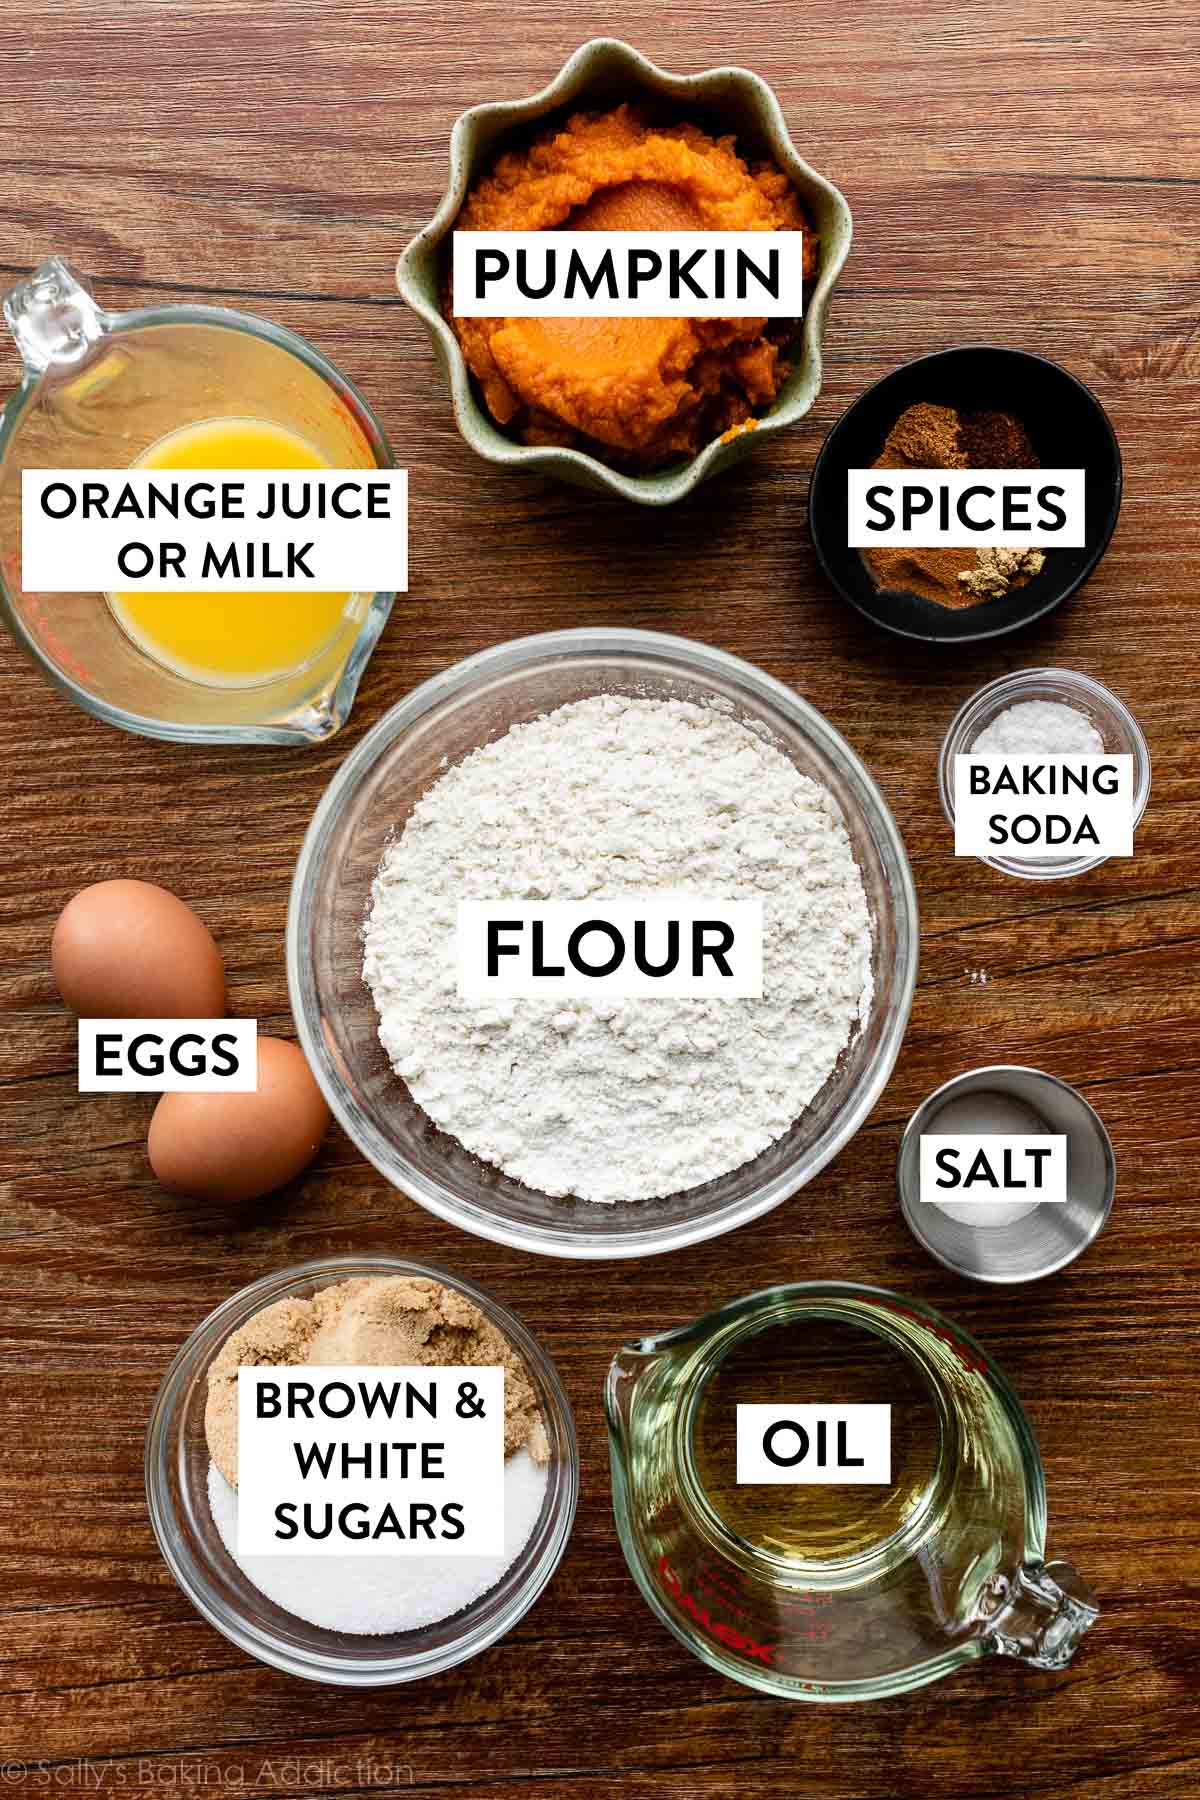 flour, baking soda, spices, salt, oil, eggs, and other ingredients in bowls on wooden backdrop.